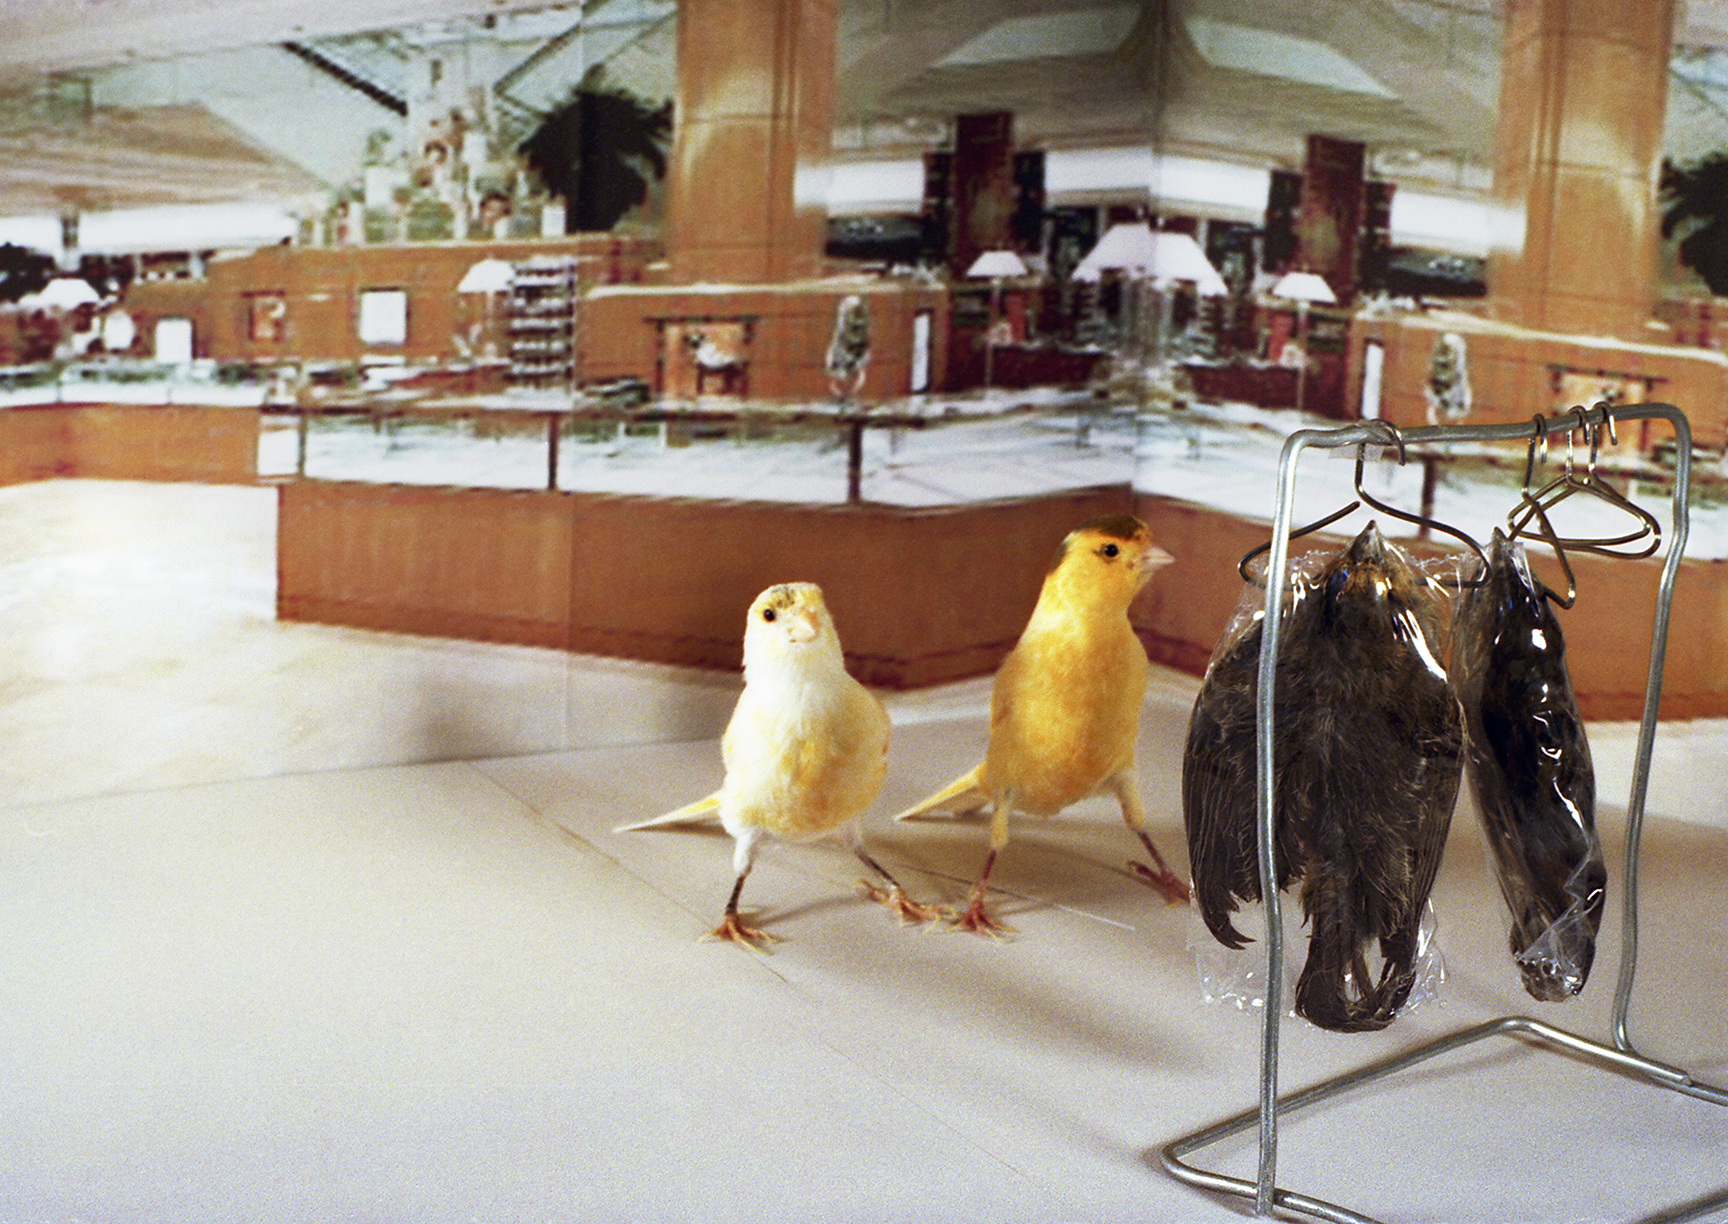 BIRDS IN A DEPARTMENT STORE IMAGE